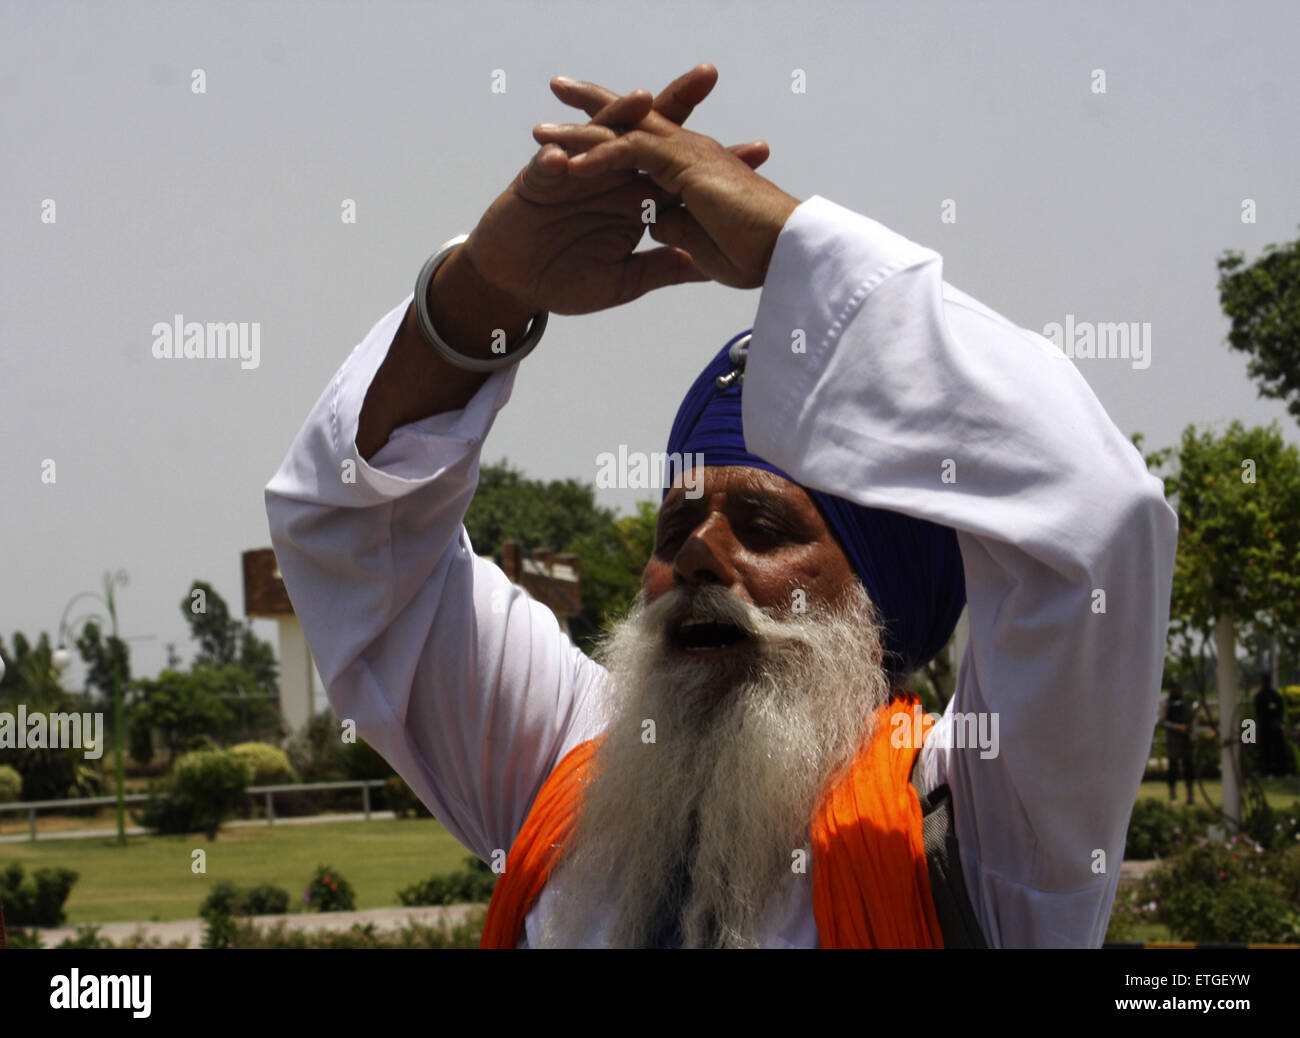 Lahore. 13th June, 2015. An Indian Sikh pilgrim prays after crossing the Wagha border post in eastern Pakistan's Lahore on June 13, 2015. Hundreds of Sikh pilgrims arrived in Pakistan on Saturday to attend ceremonies marking the death of the fifth Sikh Guru, Arjan Dev Ji. © Jamil Ahmed/Xinhua/Alamy Live News Stock Photo